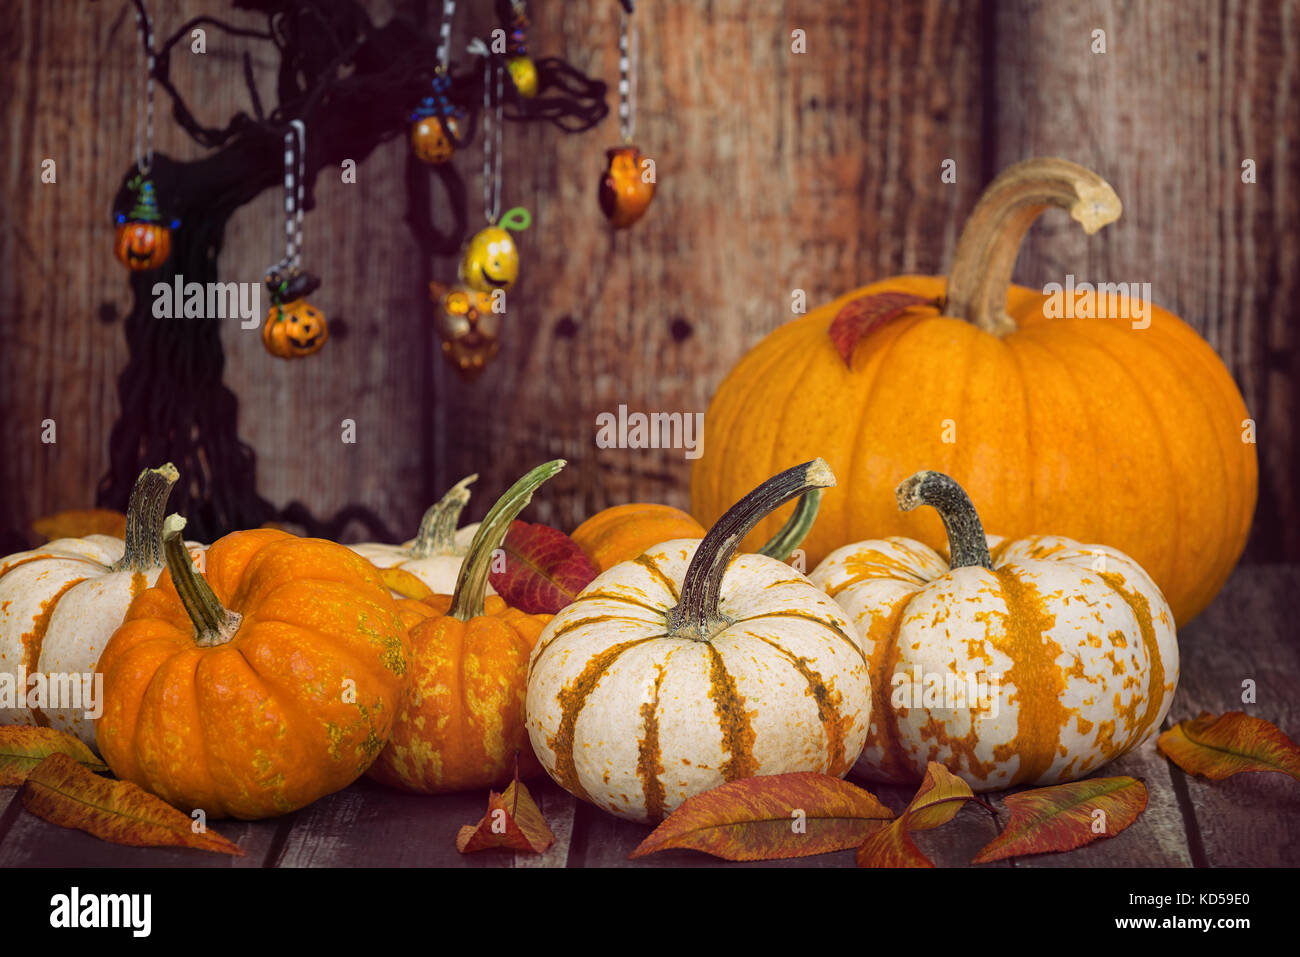 Pumpkin display with autumn leaves. Rustic wooden background with decorated Halloween tree. Stock Photo